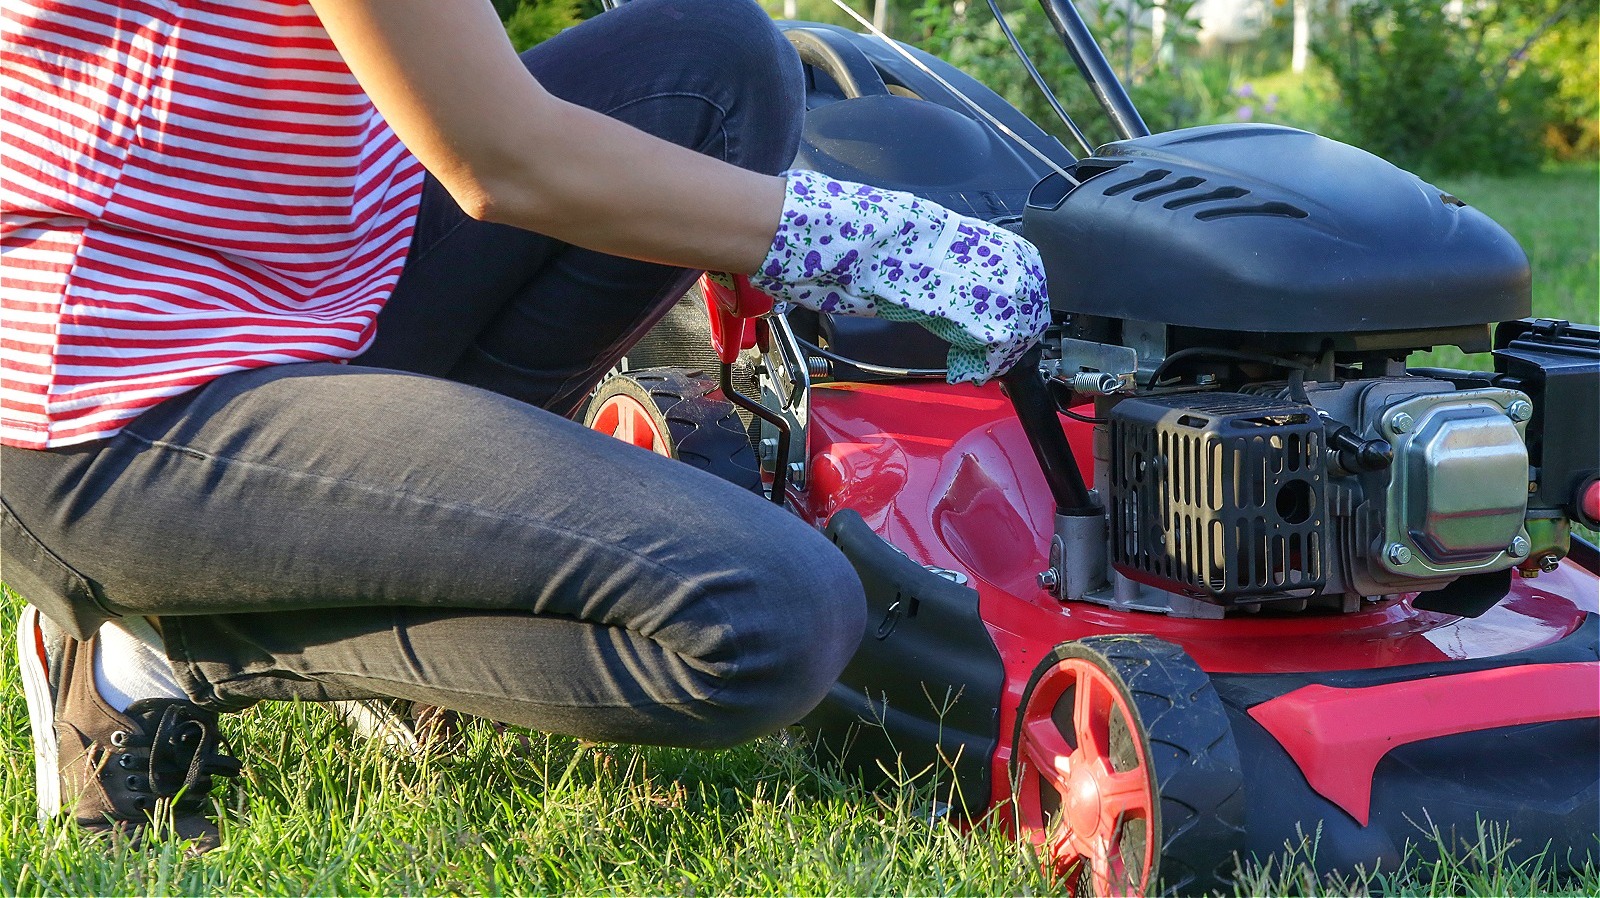 One Viral Lawn Mower Tip Proves We’ve Been Pouring Engine Oil All Wrong – House Digest